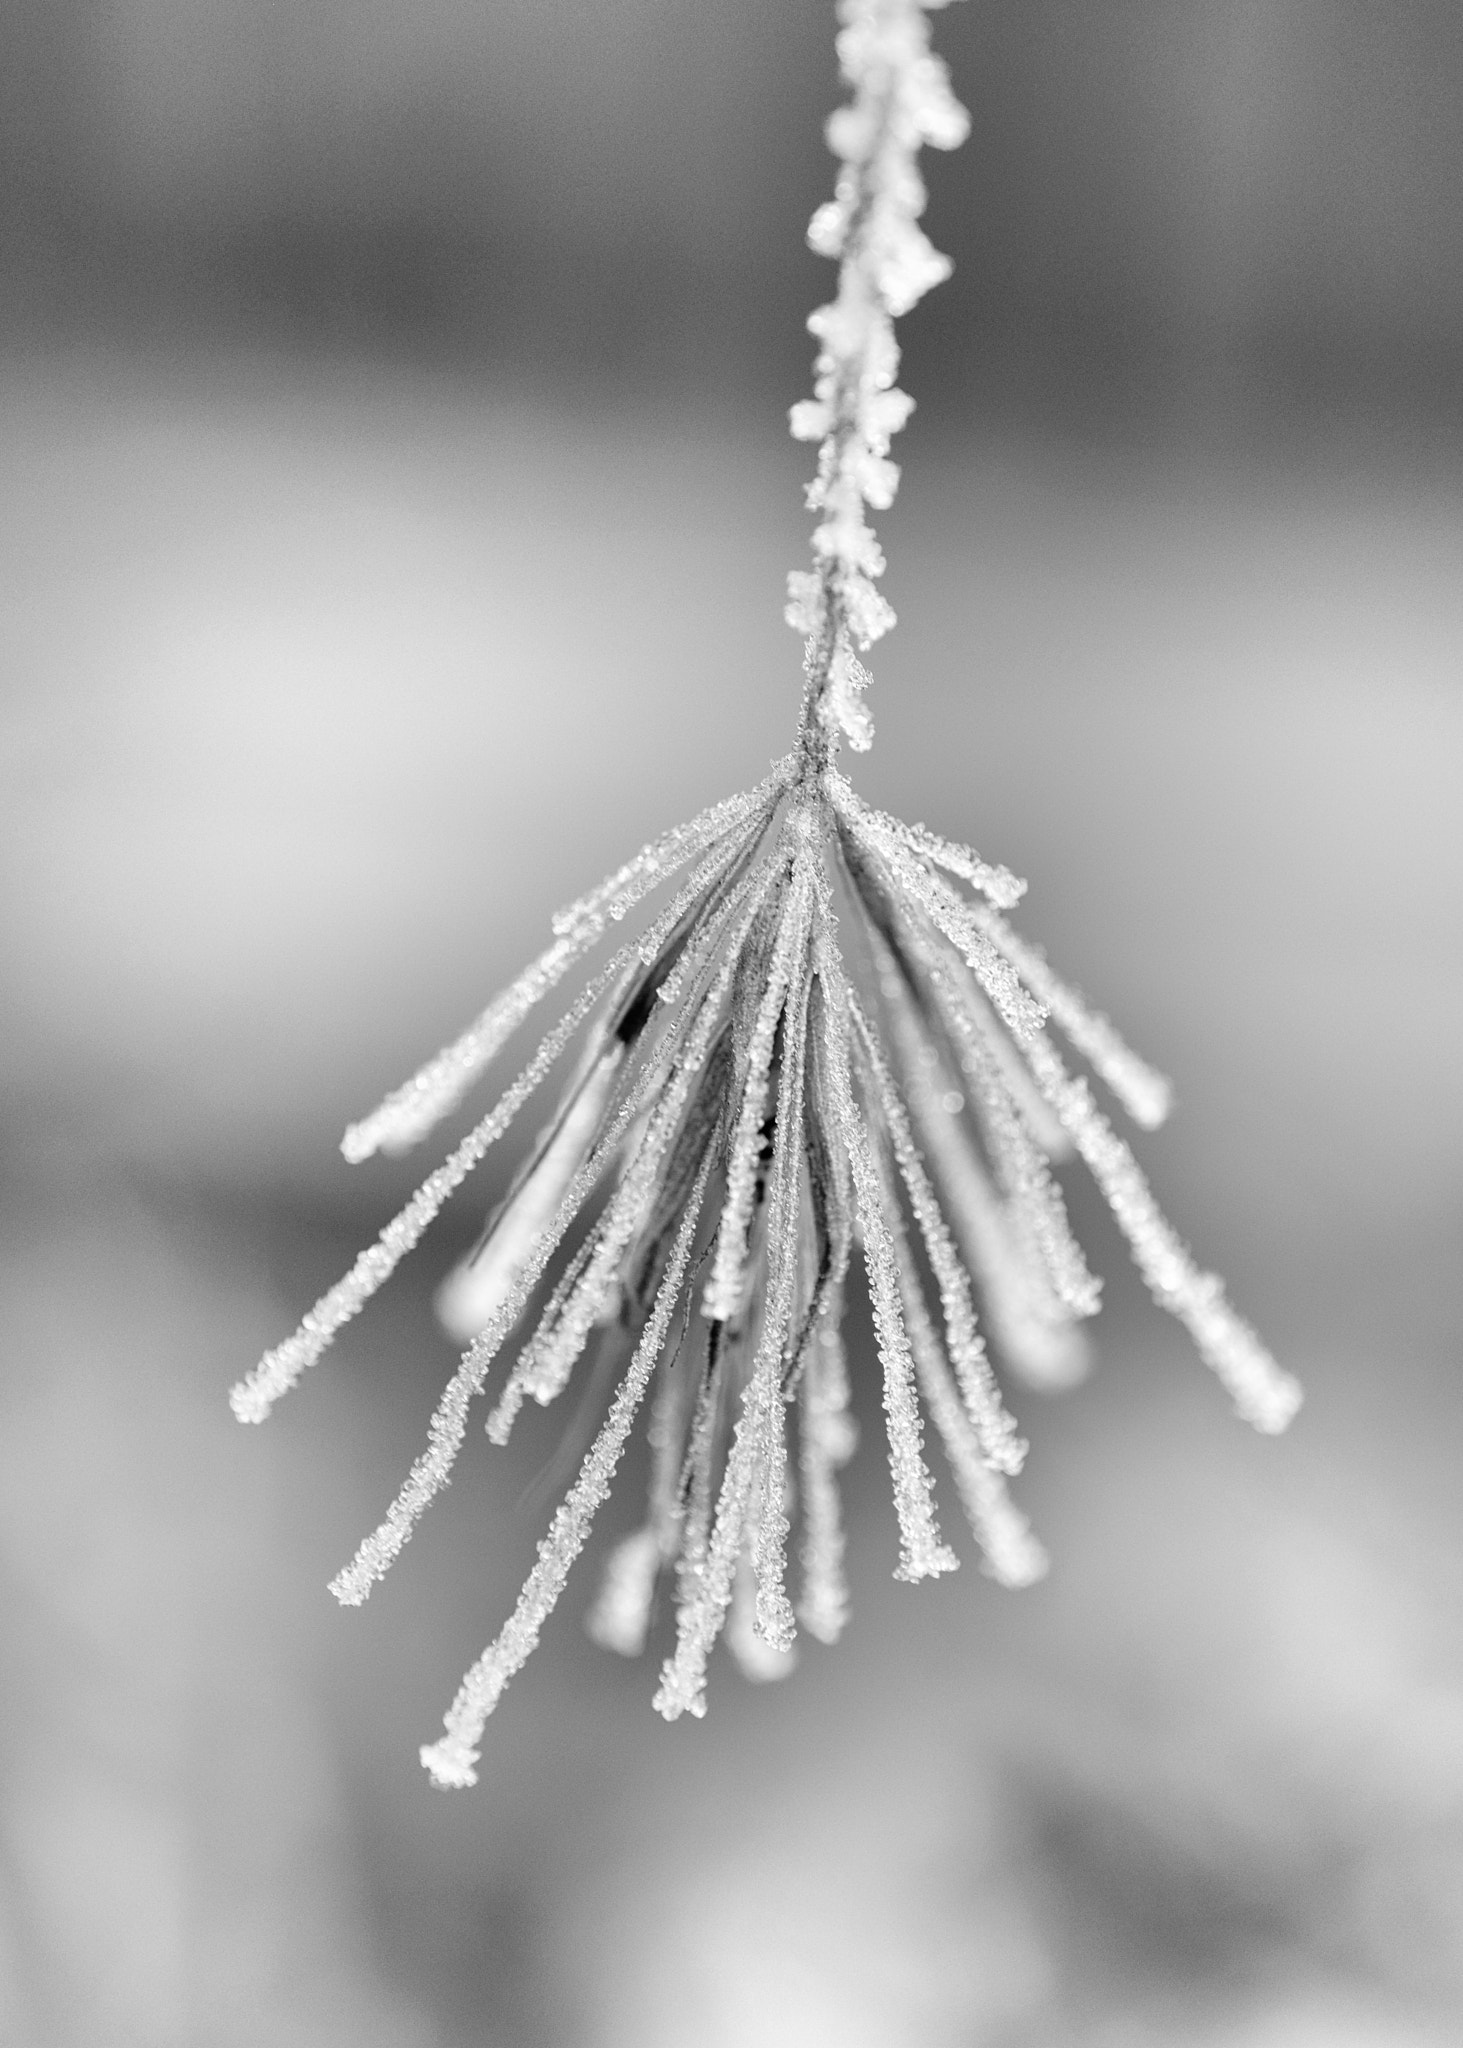 Fujifilm X-T2 + ZEISS Touit 50mm F2.8 sample photo. Frosty grass seed head photography